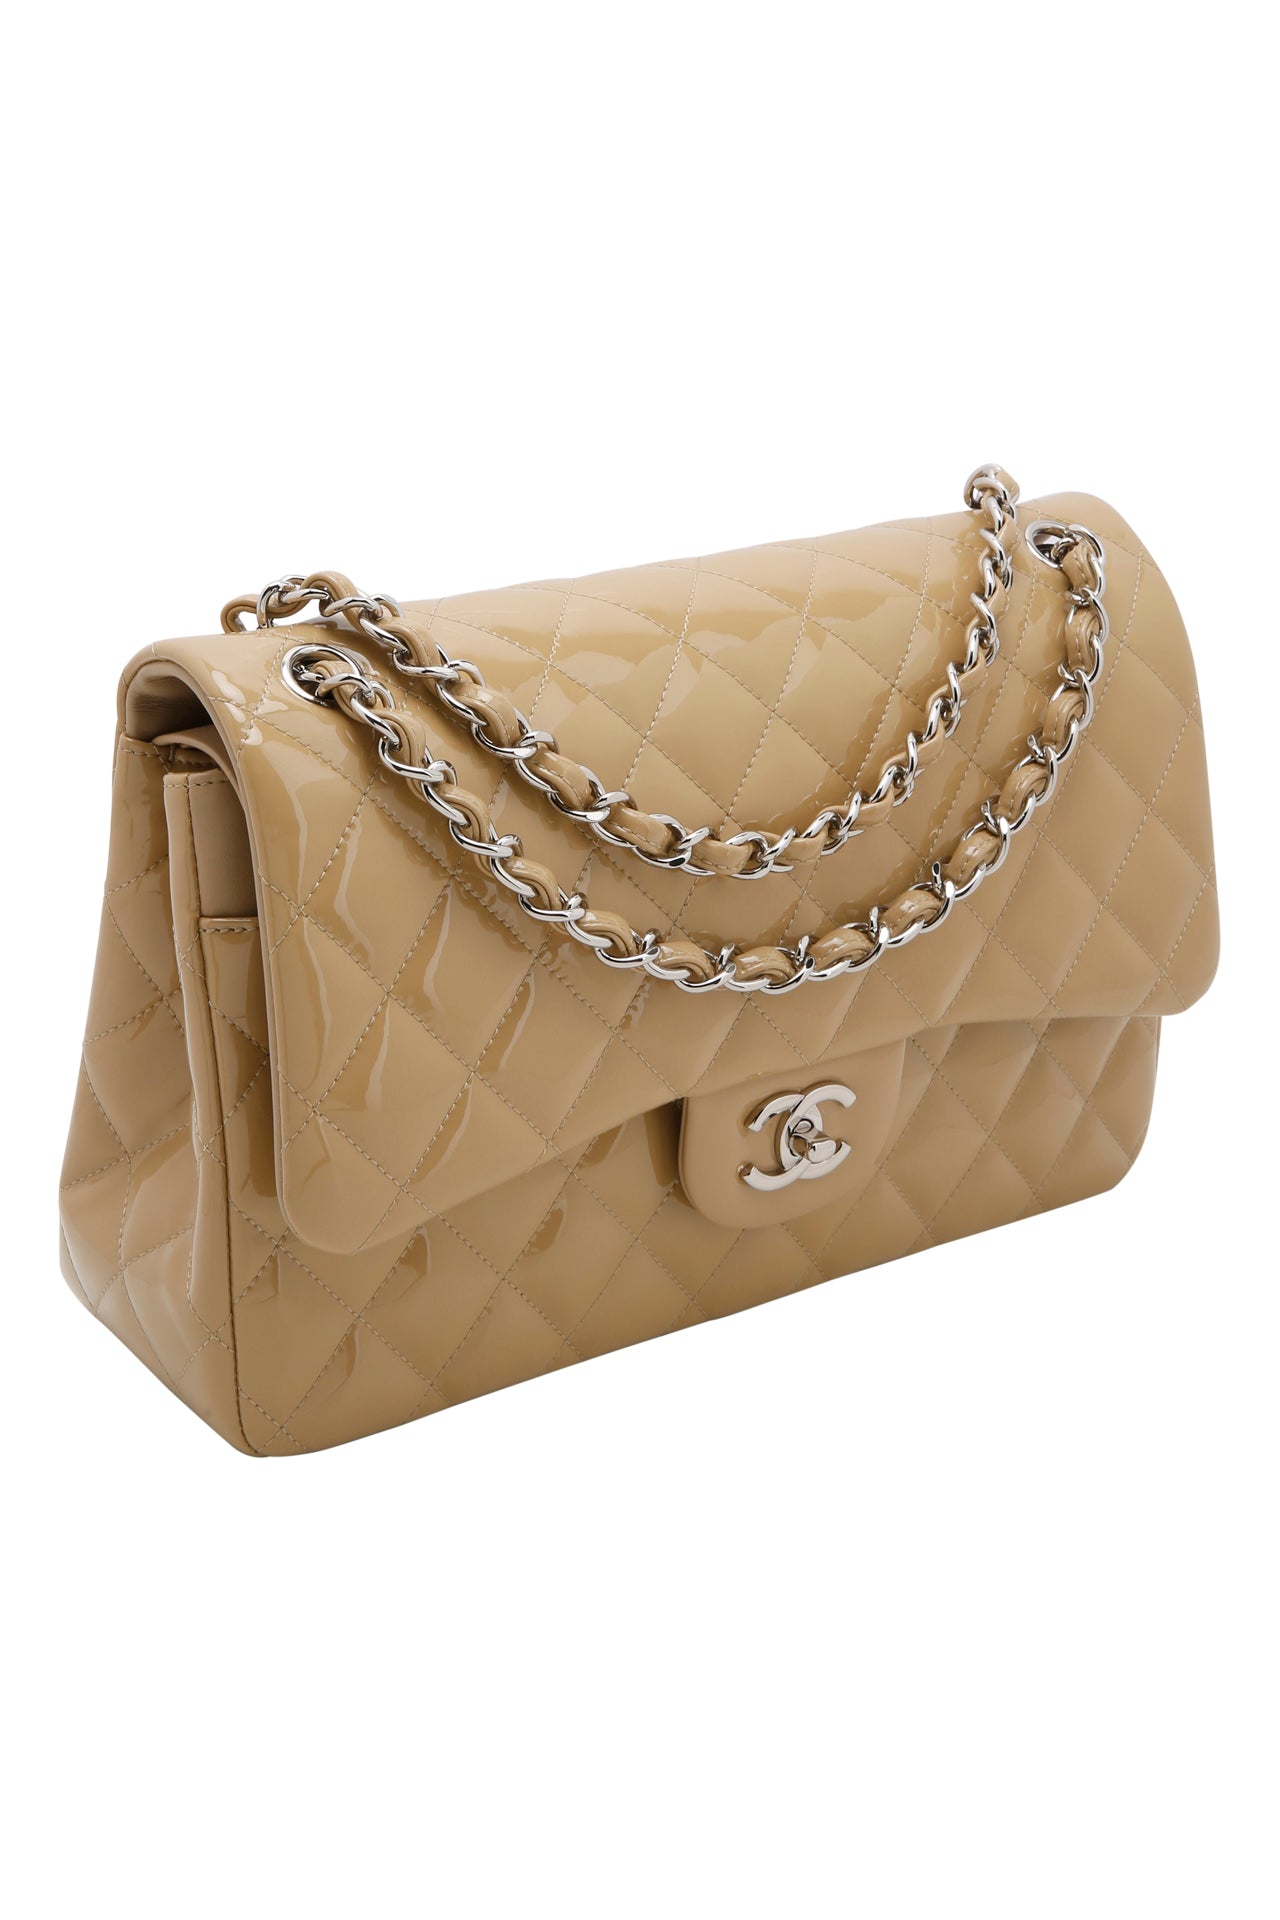 Chanel Tan Quilted Patent Leather Maxi Double Flap, myGemma, HK